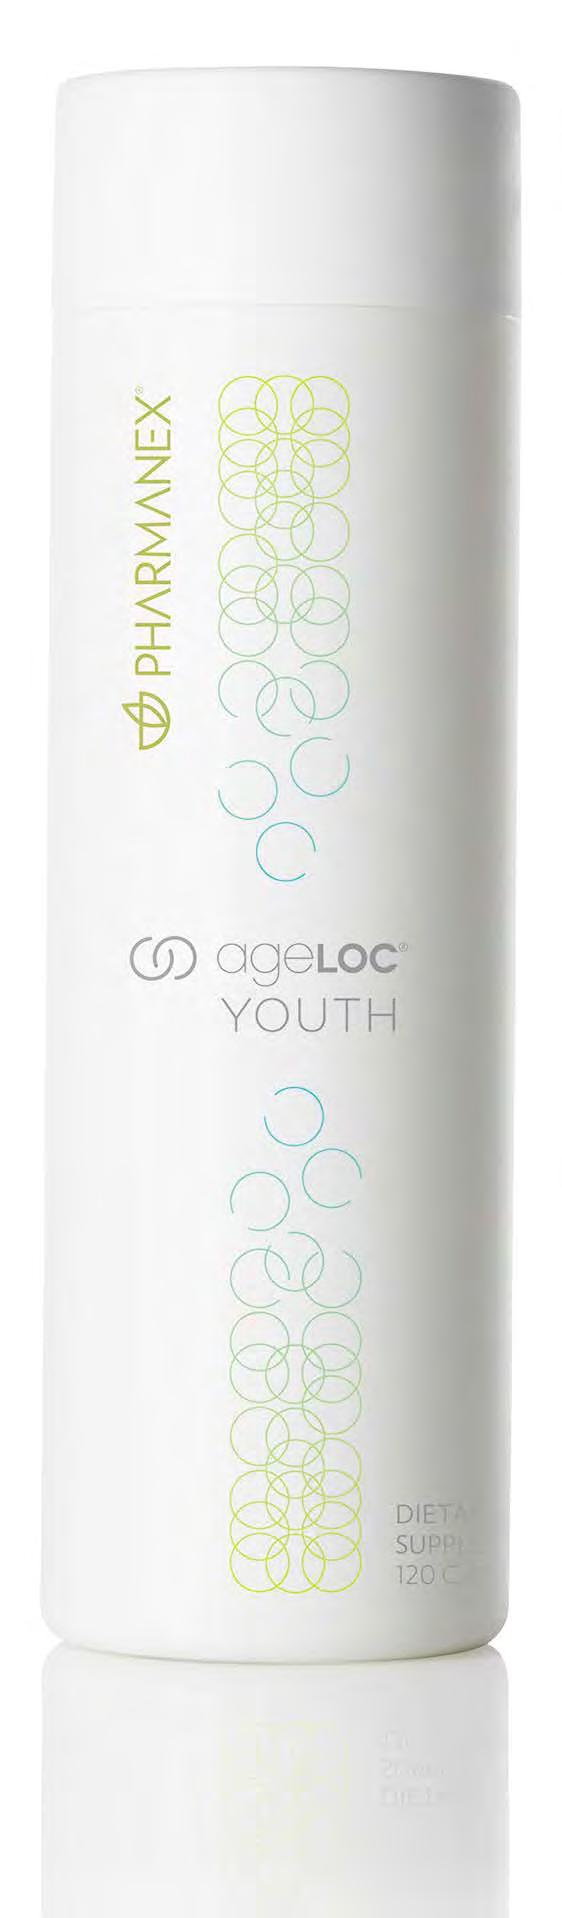 47 AGELOC YOUTH 55 PHARMANEX The power to defy your age.